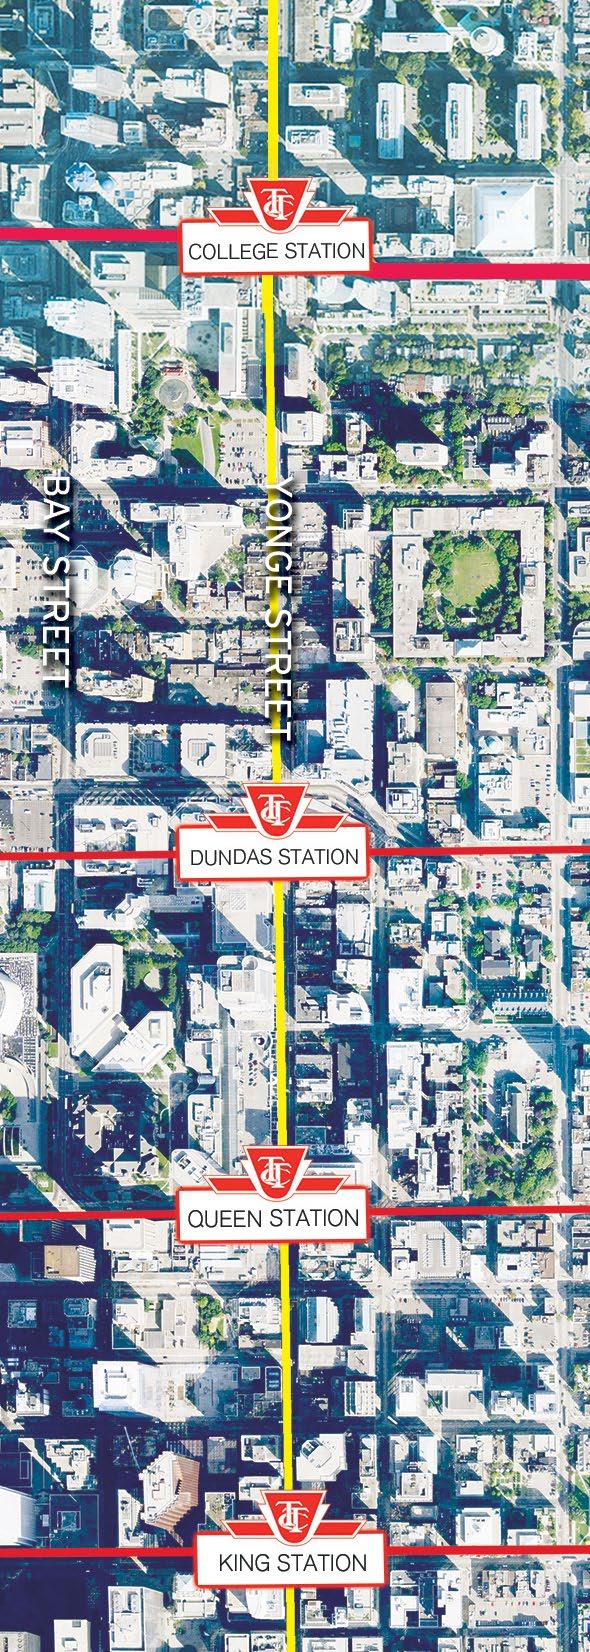 TRANSPORTATION MAP OVERVIEW 565,000 people work and 175,000 live within a 10 minute walk of Yonge and Dundas Ryerson University brings close to 115,000 students and faculty to the district, while the